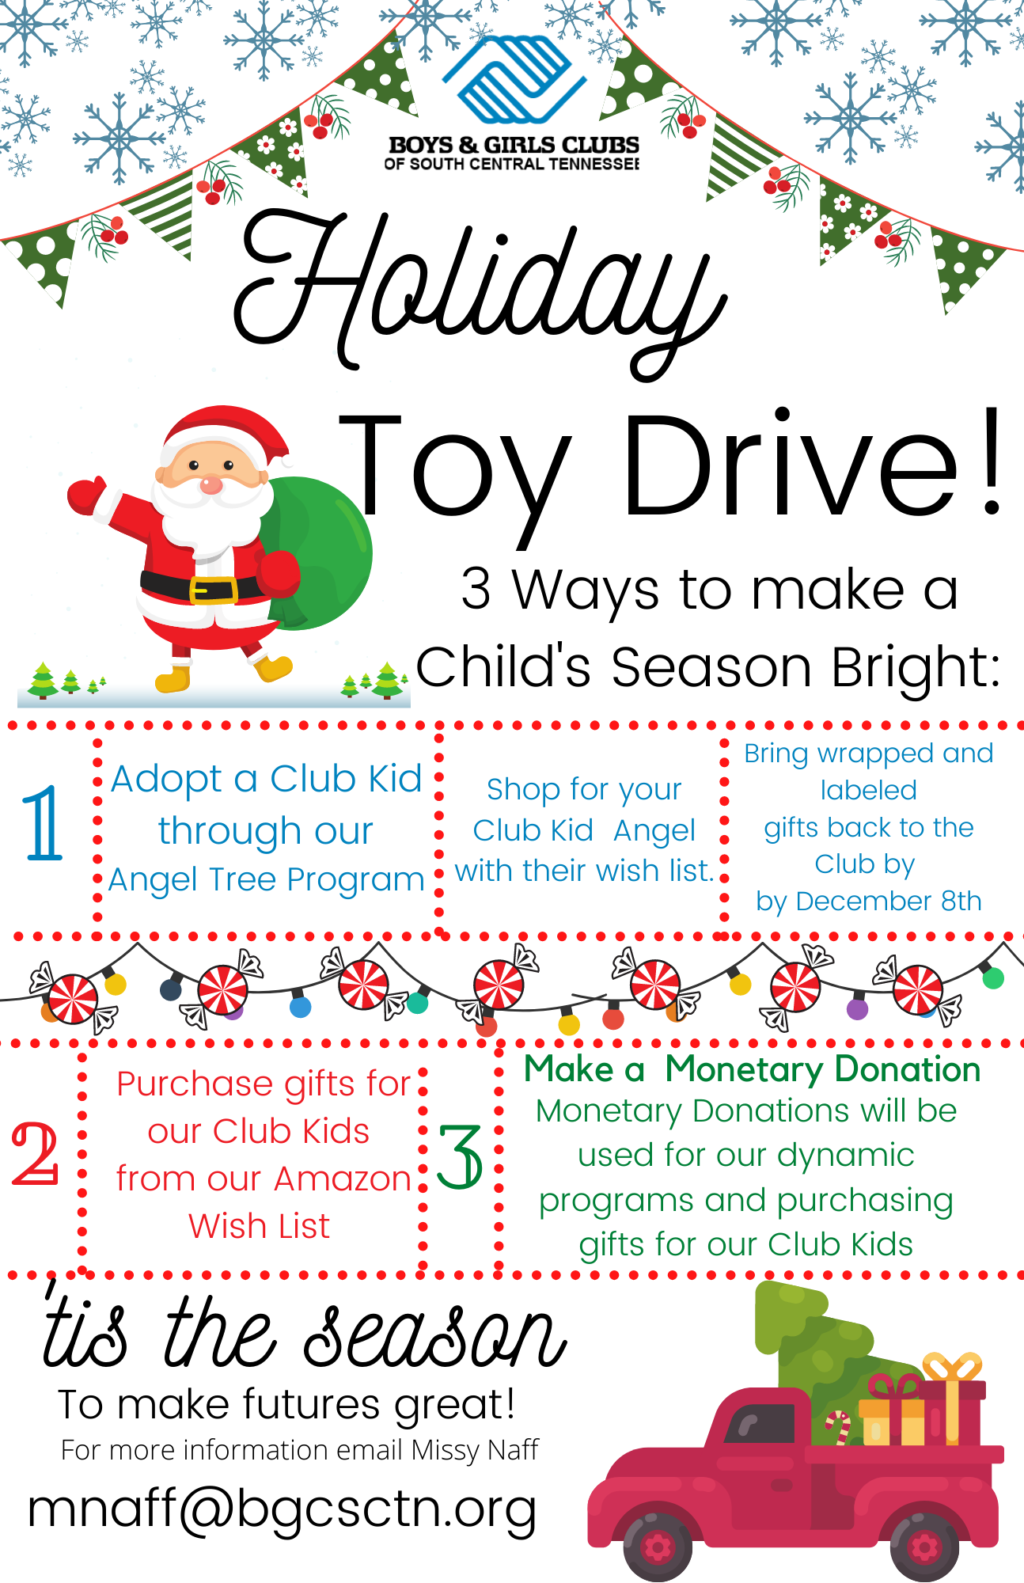 Want to help provide gifts for our kids this holiday season? Each year it is our goal to make sure our kids and families are taken care of during the holiday season, especially those who need us most. Email Missy Naff at mnaff@bgcsctn.org or call (931) 490-9401 x2604 to find out how you can help.